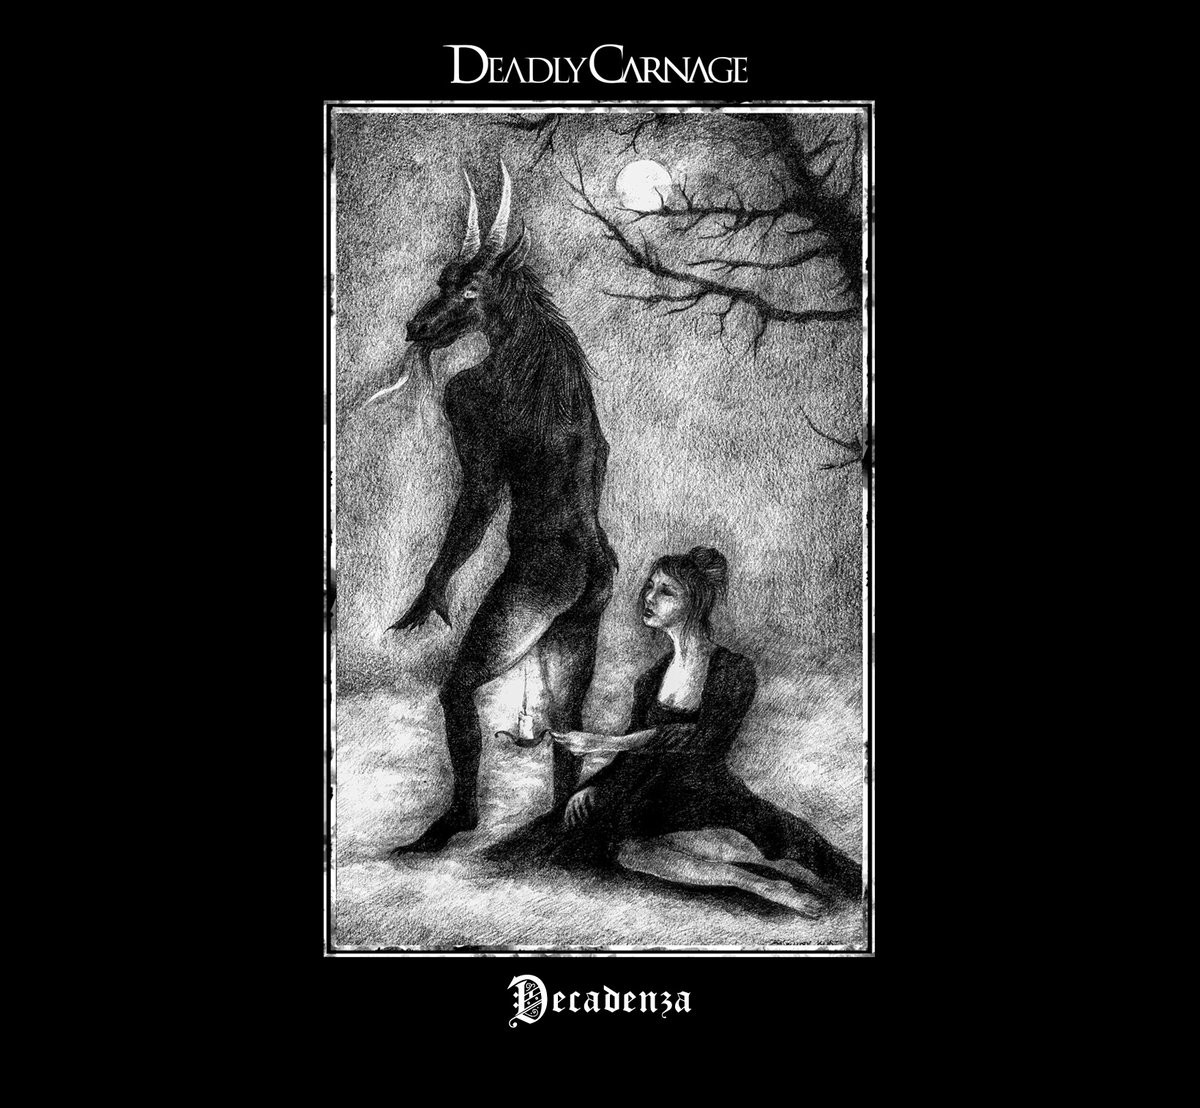 Deadly Carnage - Decadenza (2008) Cover